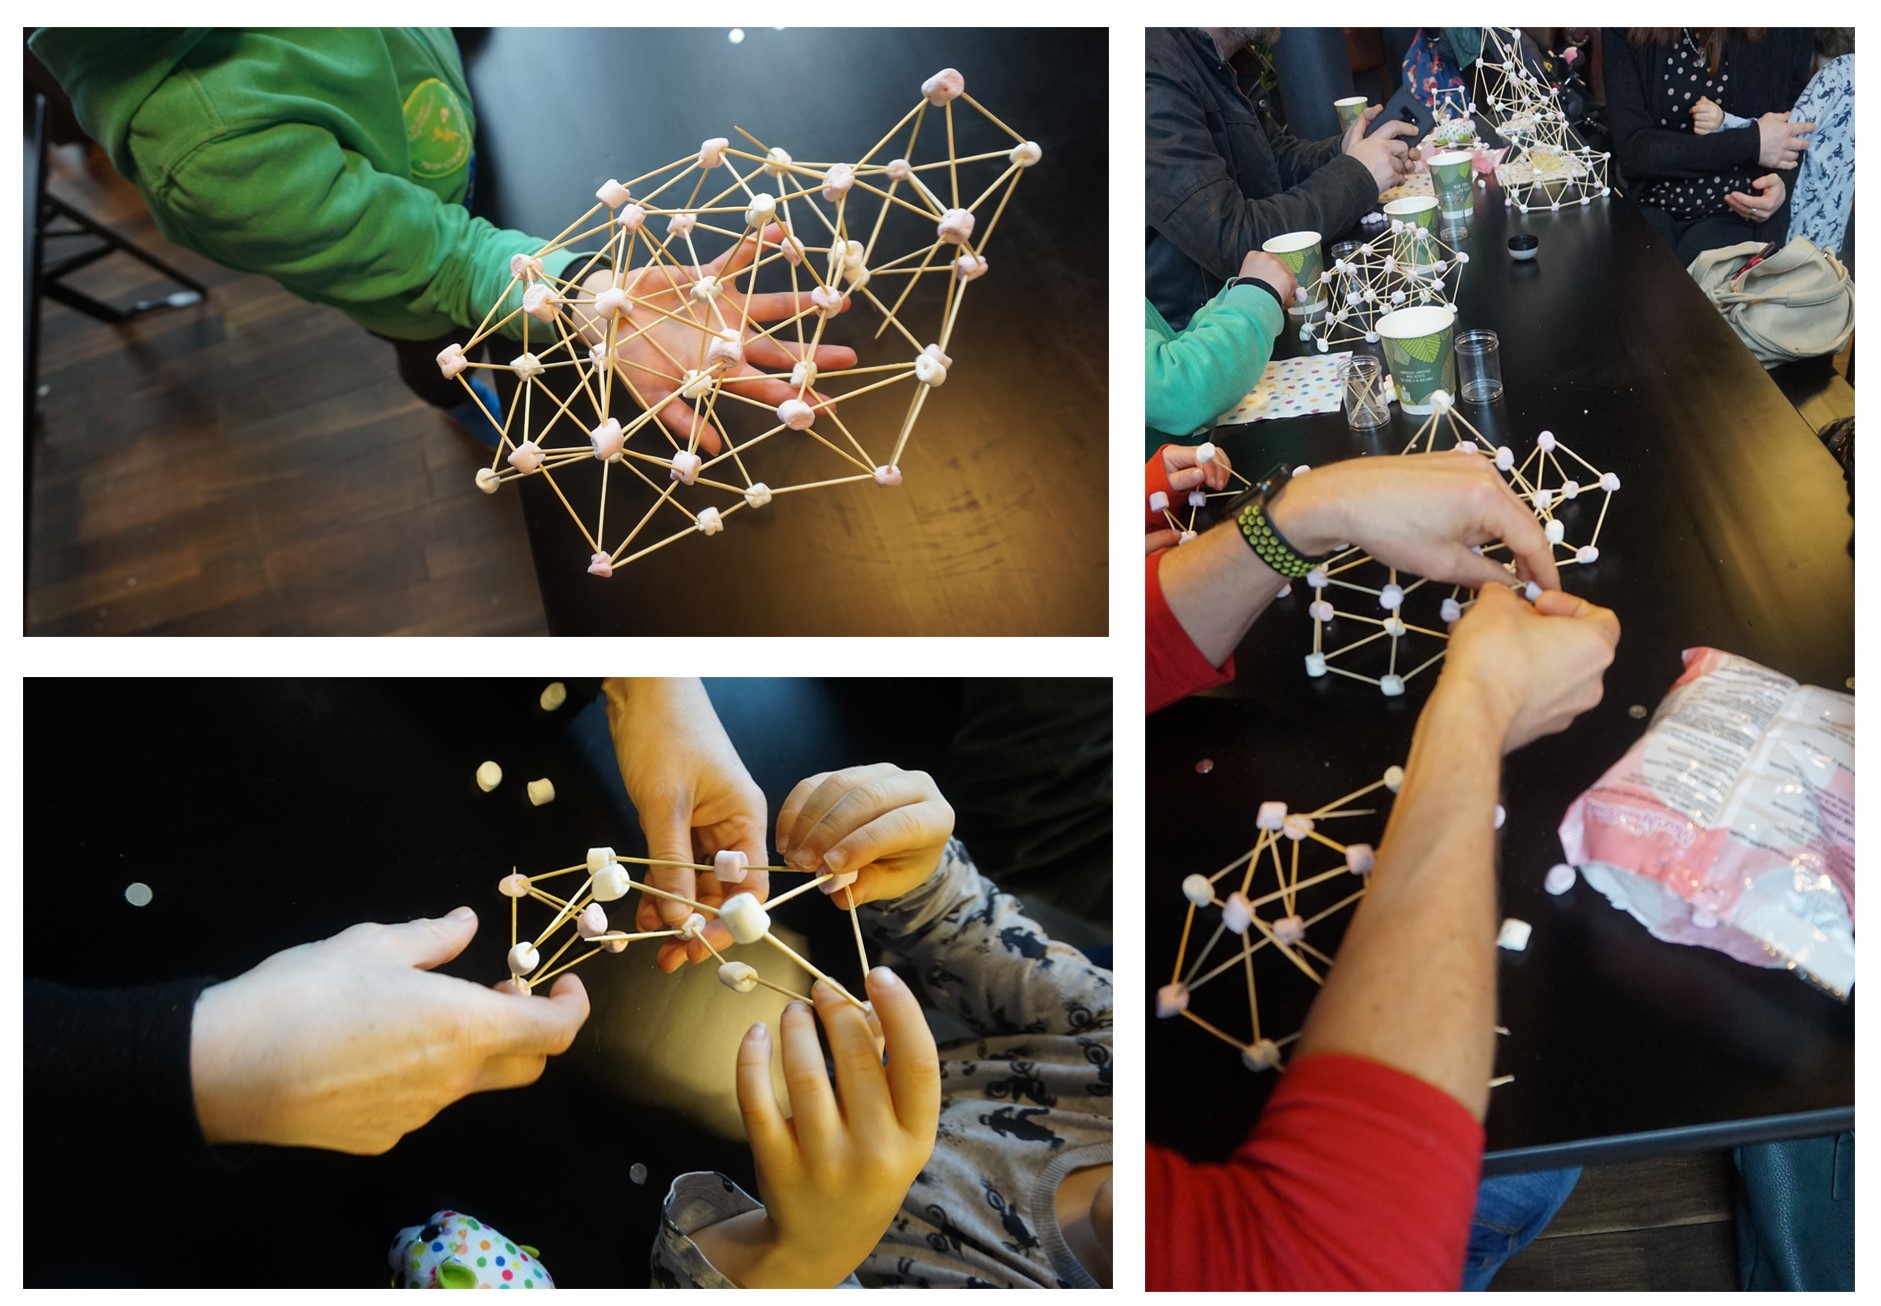 Adult's and children's hands working on creating structures from marshmallows and toothpicks.